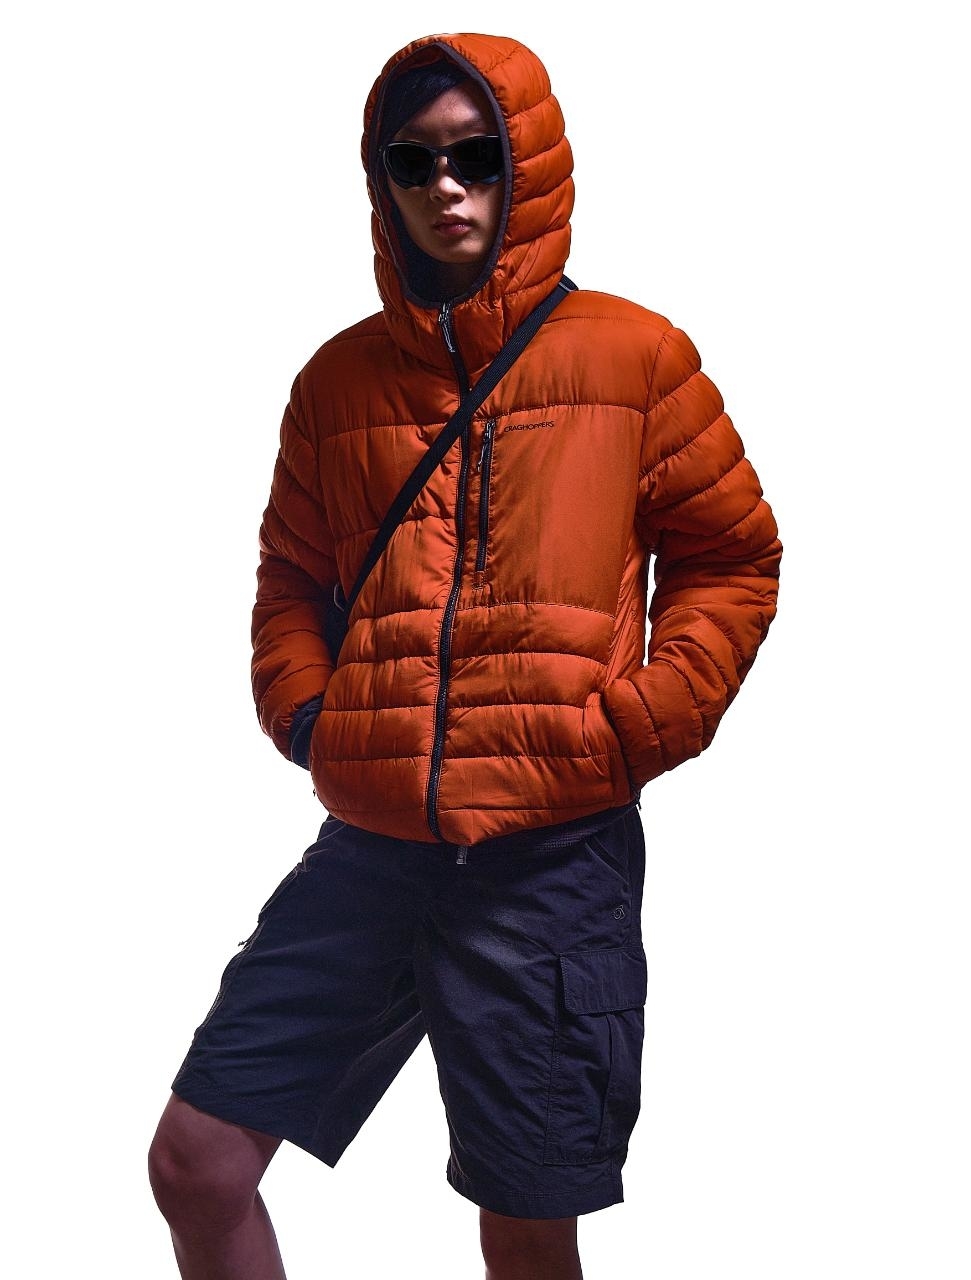 Individual in oversized puffer jacket with hood up, sunglasses, and shorts, hands in pockets, posing against a white background